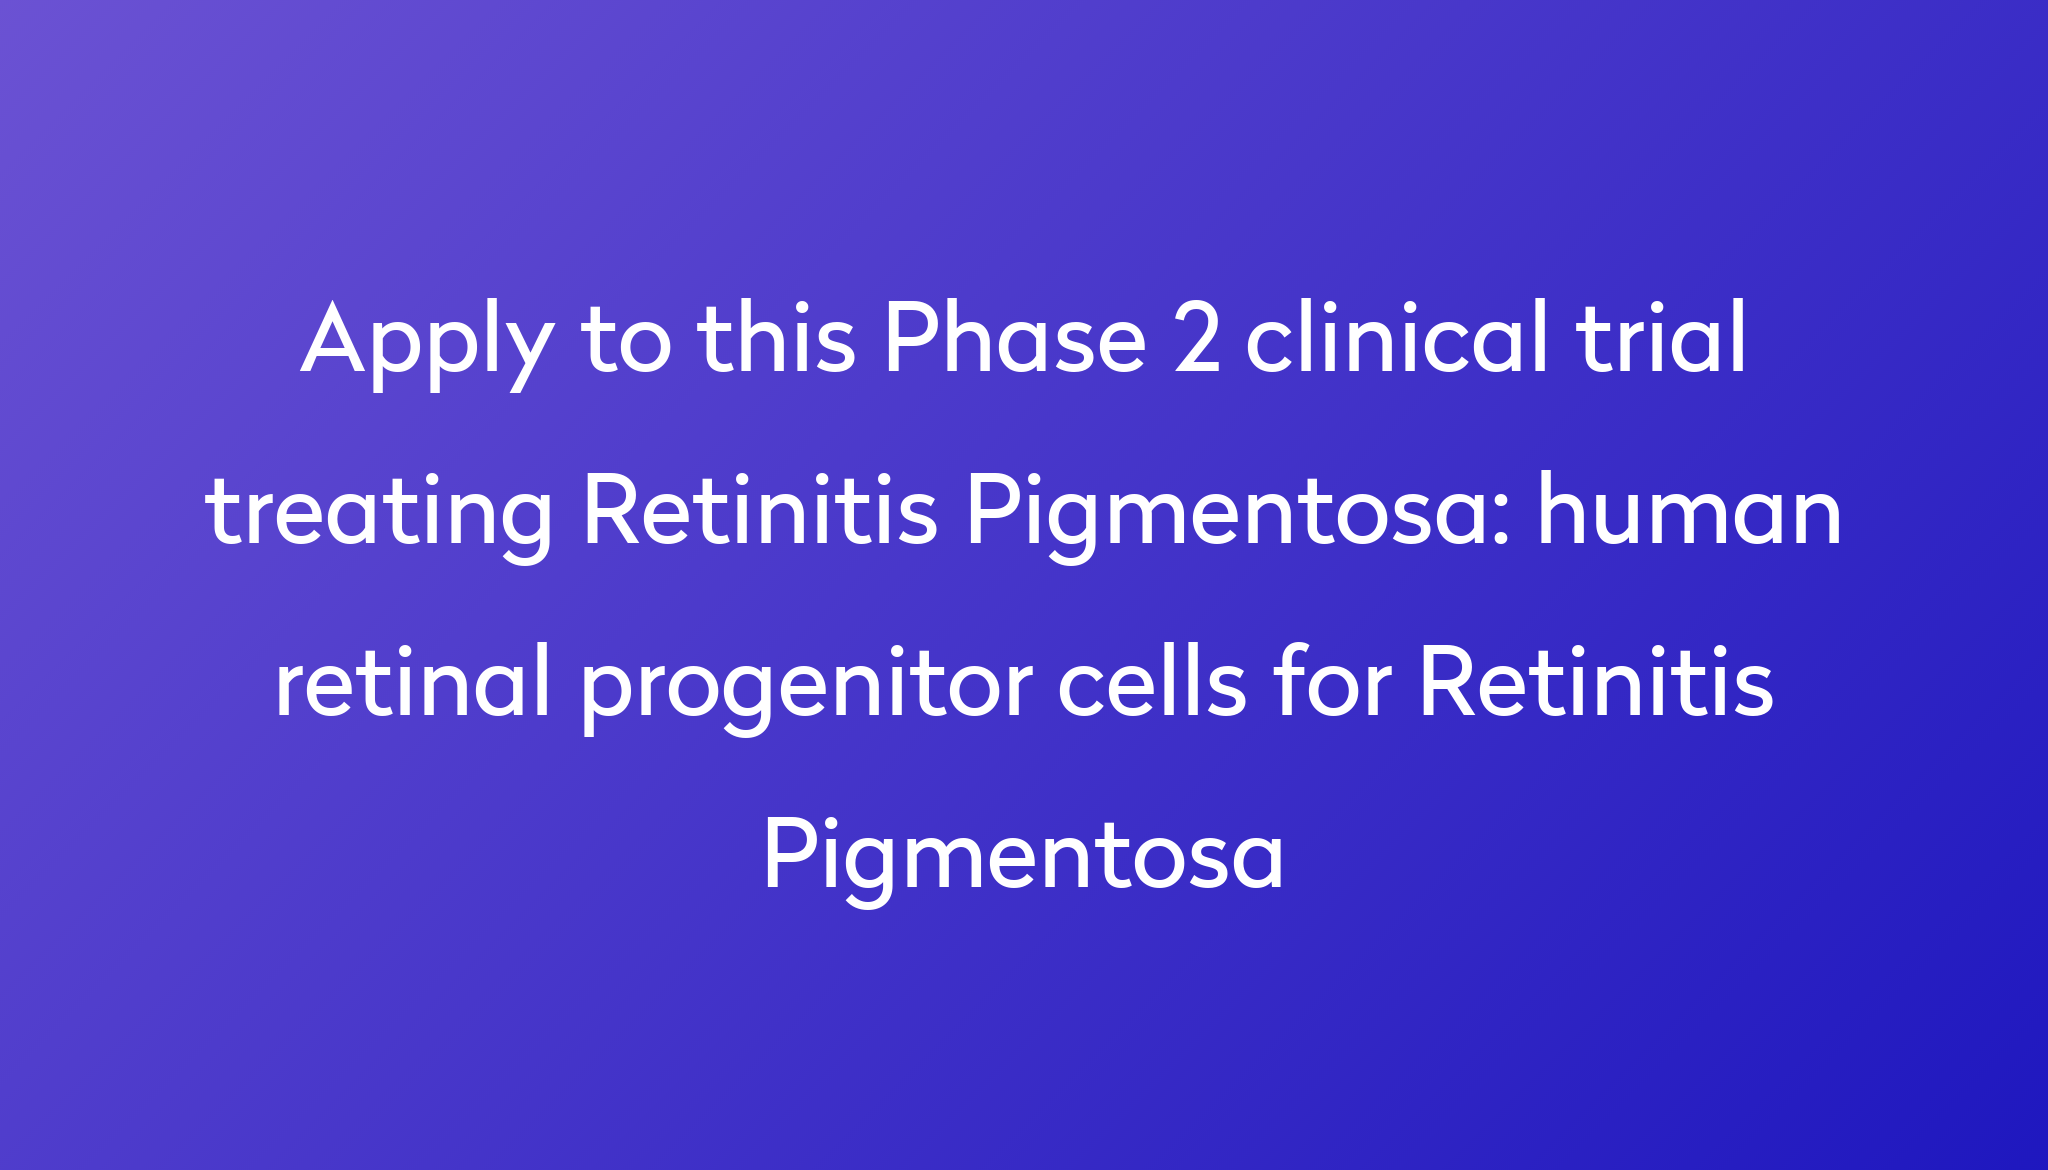 human retinal progenitor cells for Retinitis Pigmentosa Clinical Trial